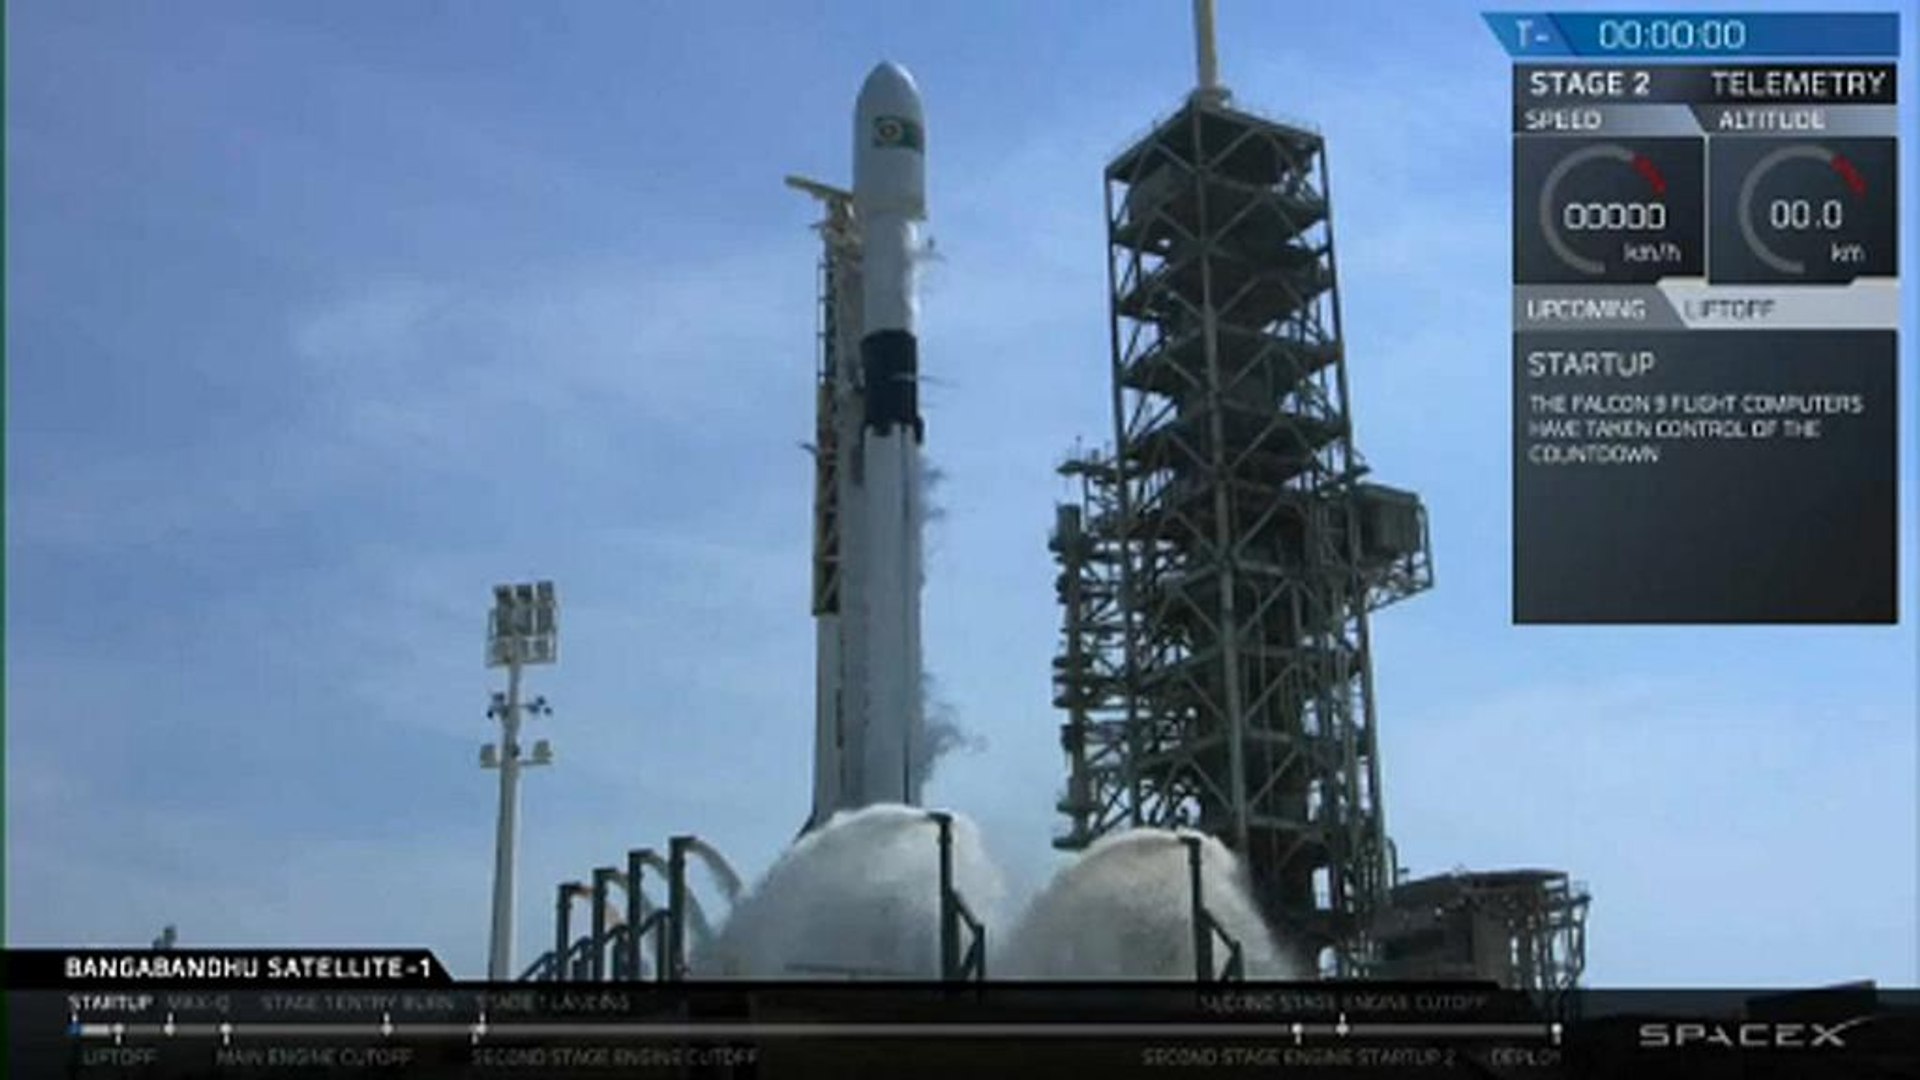 SpaceX has announced a new record for the most successful launch of a Falcon 9 rocket. The launch of